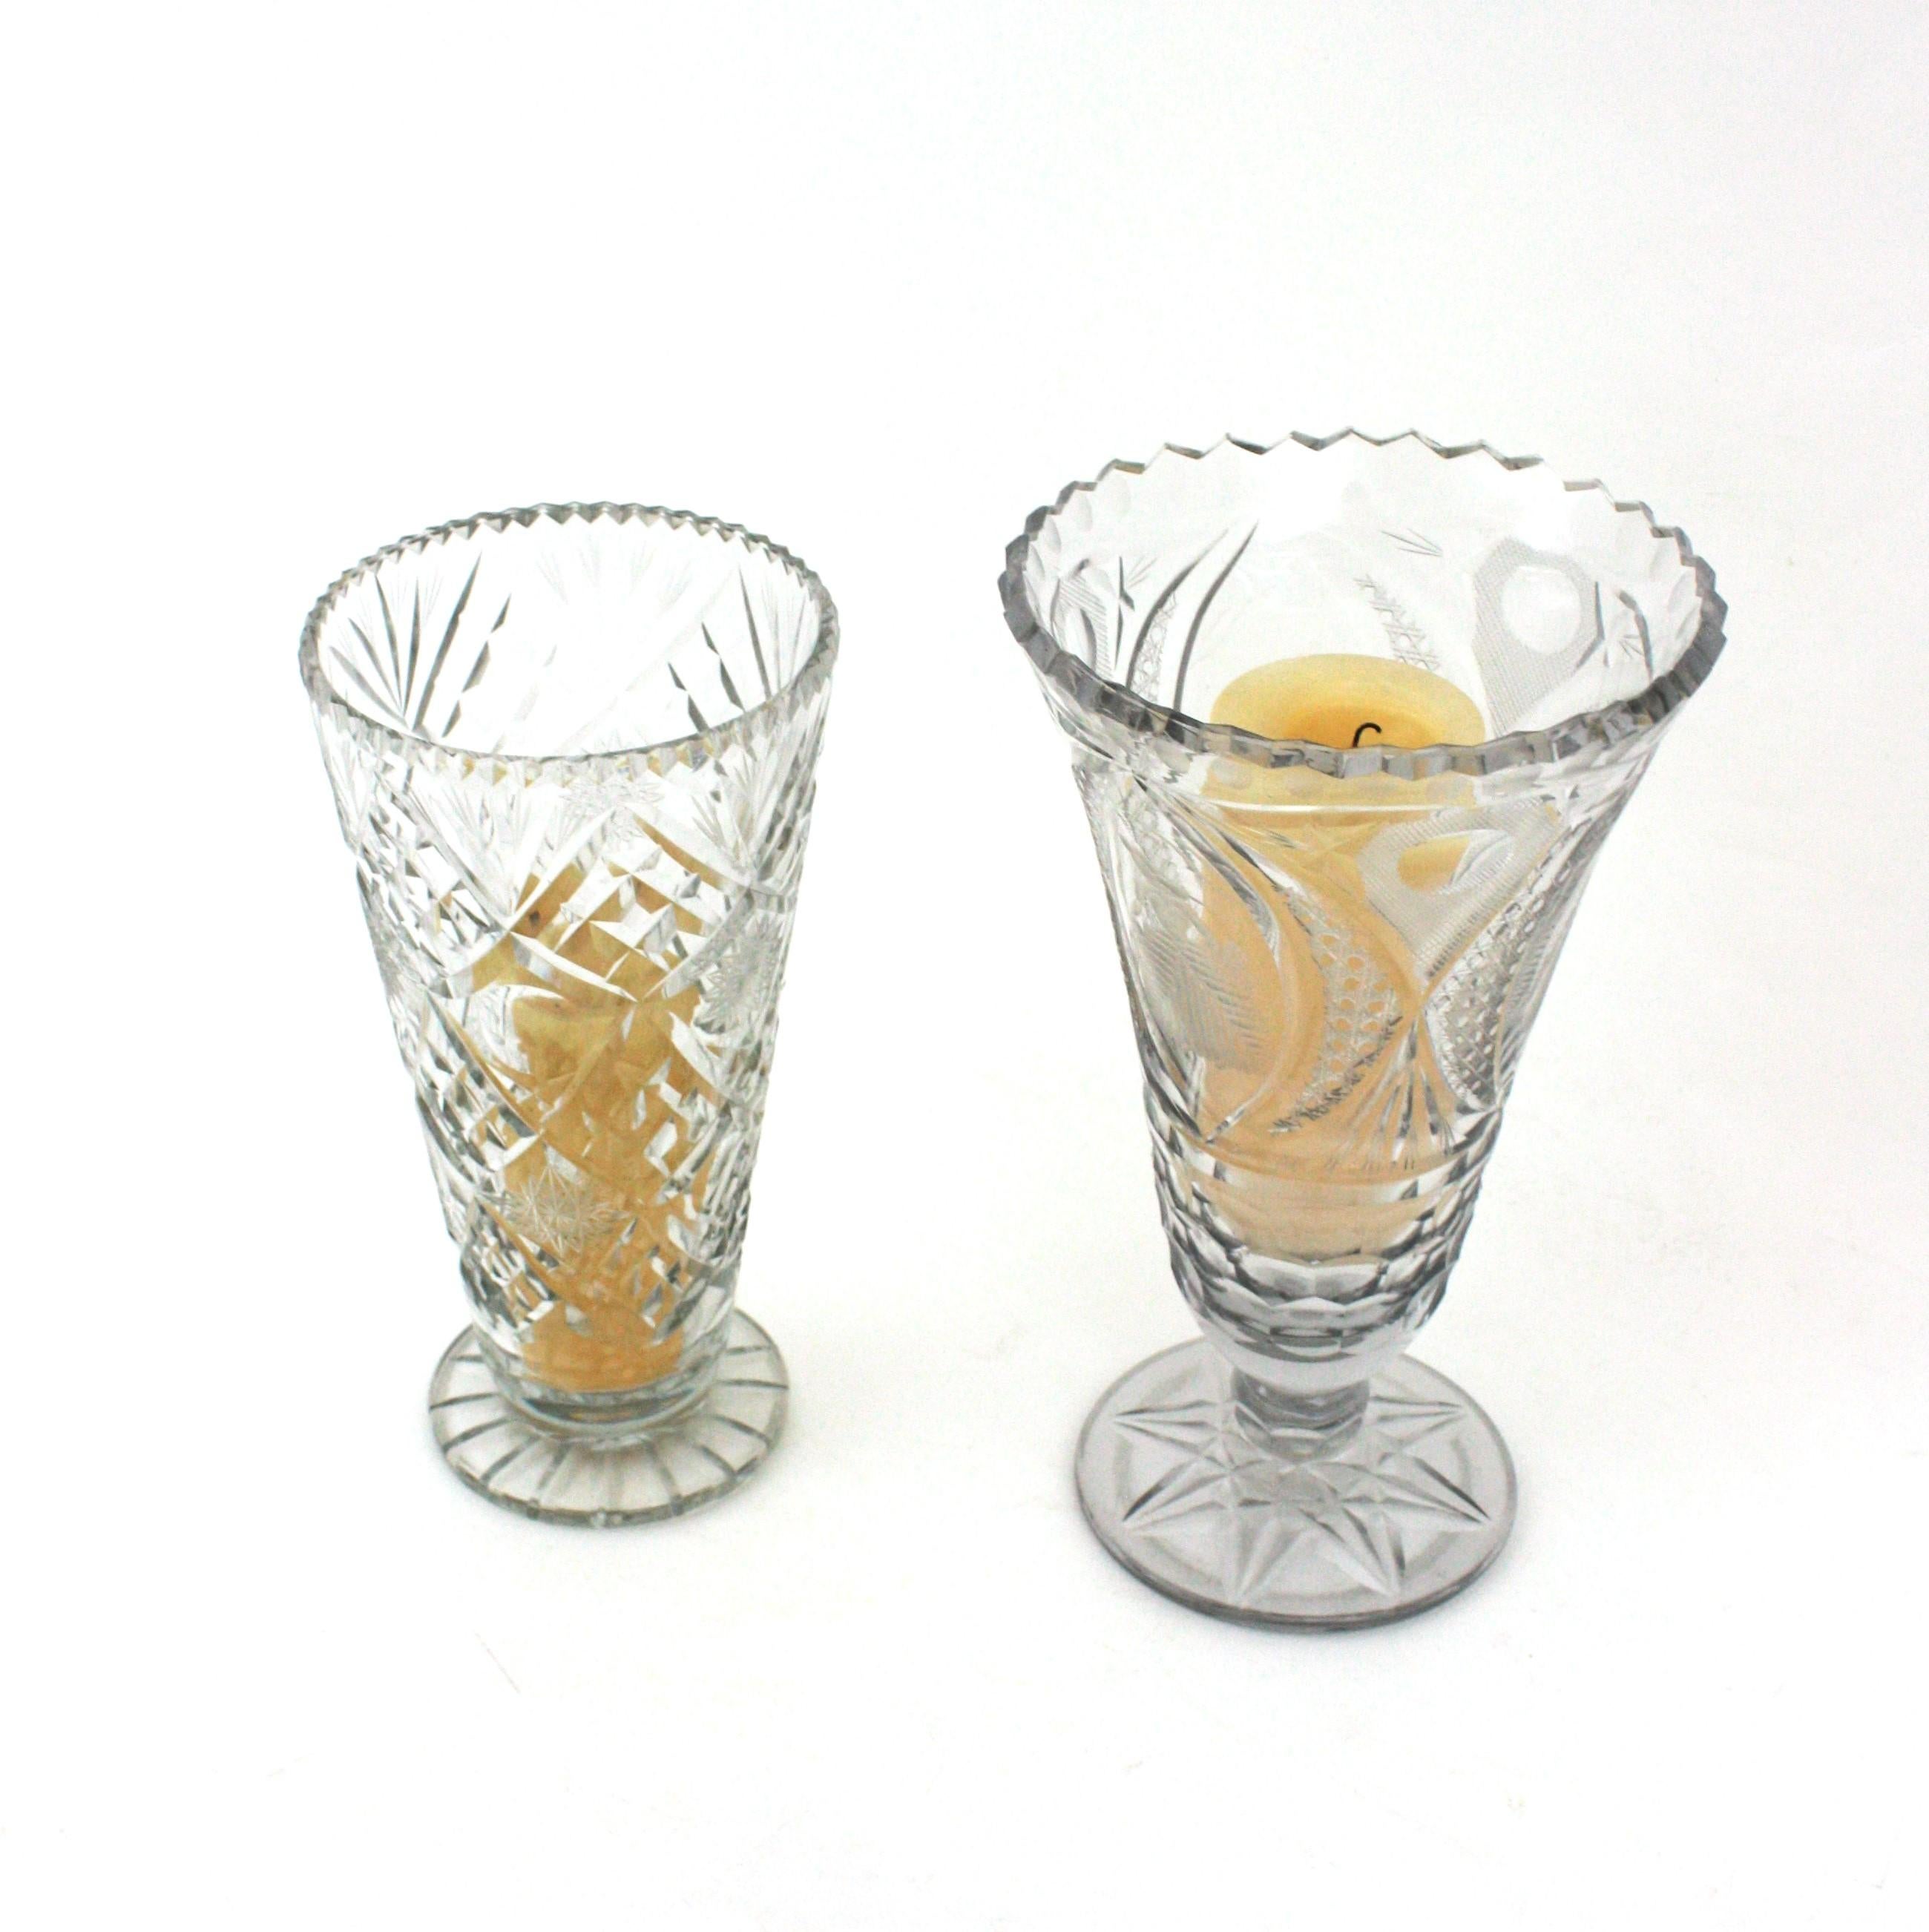 Unmatching Pair of Cut Crystal Vases or Hurricane Candle Holders In Good Condition For Sale In Barcelona, ES